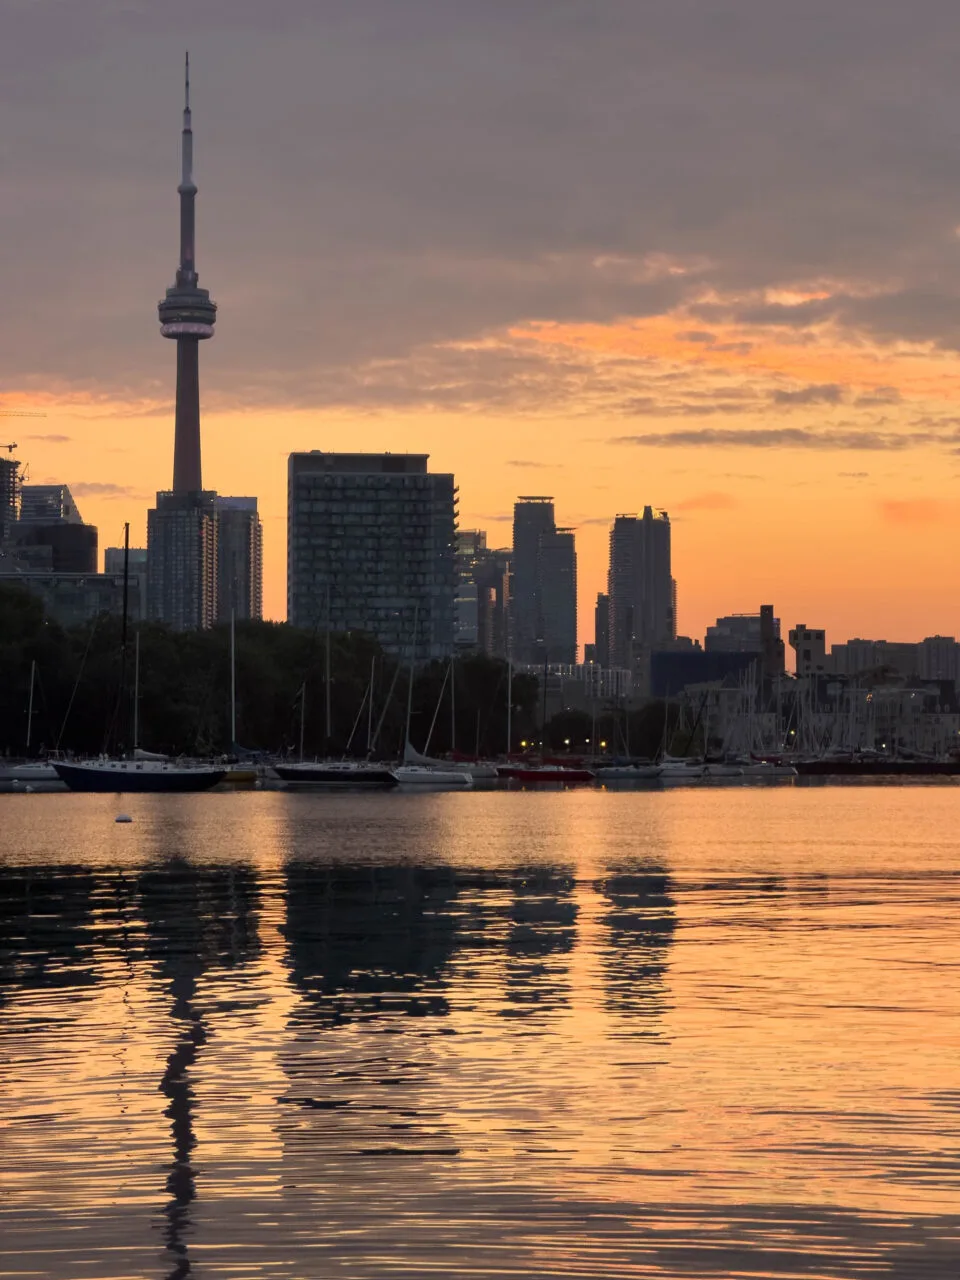 Getting up early to see the sunrise over the Toronto skyline is one of the many free things to do in the city.